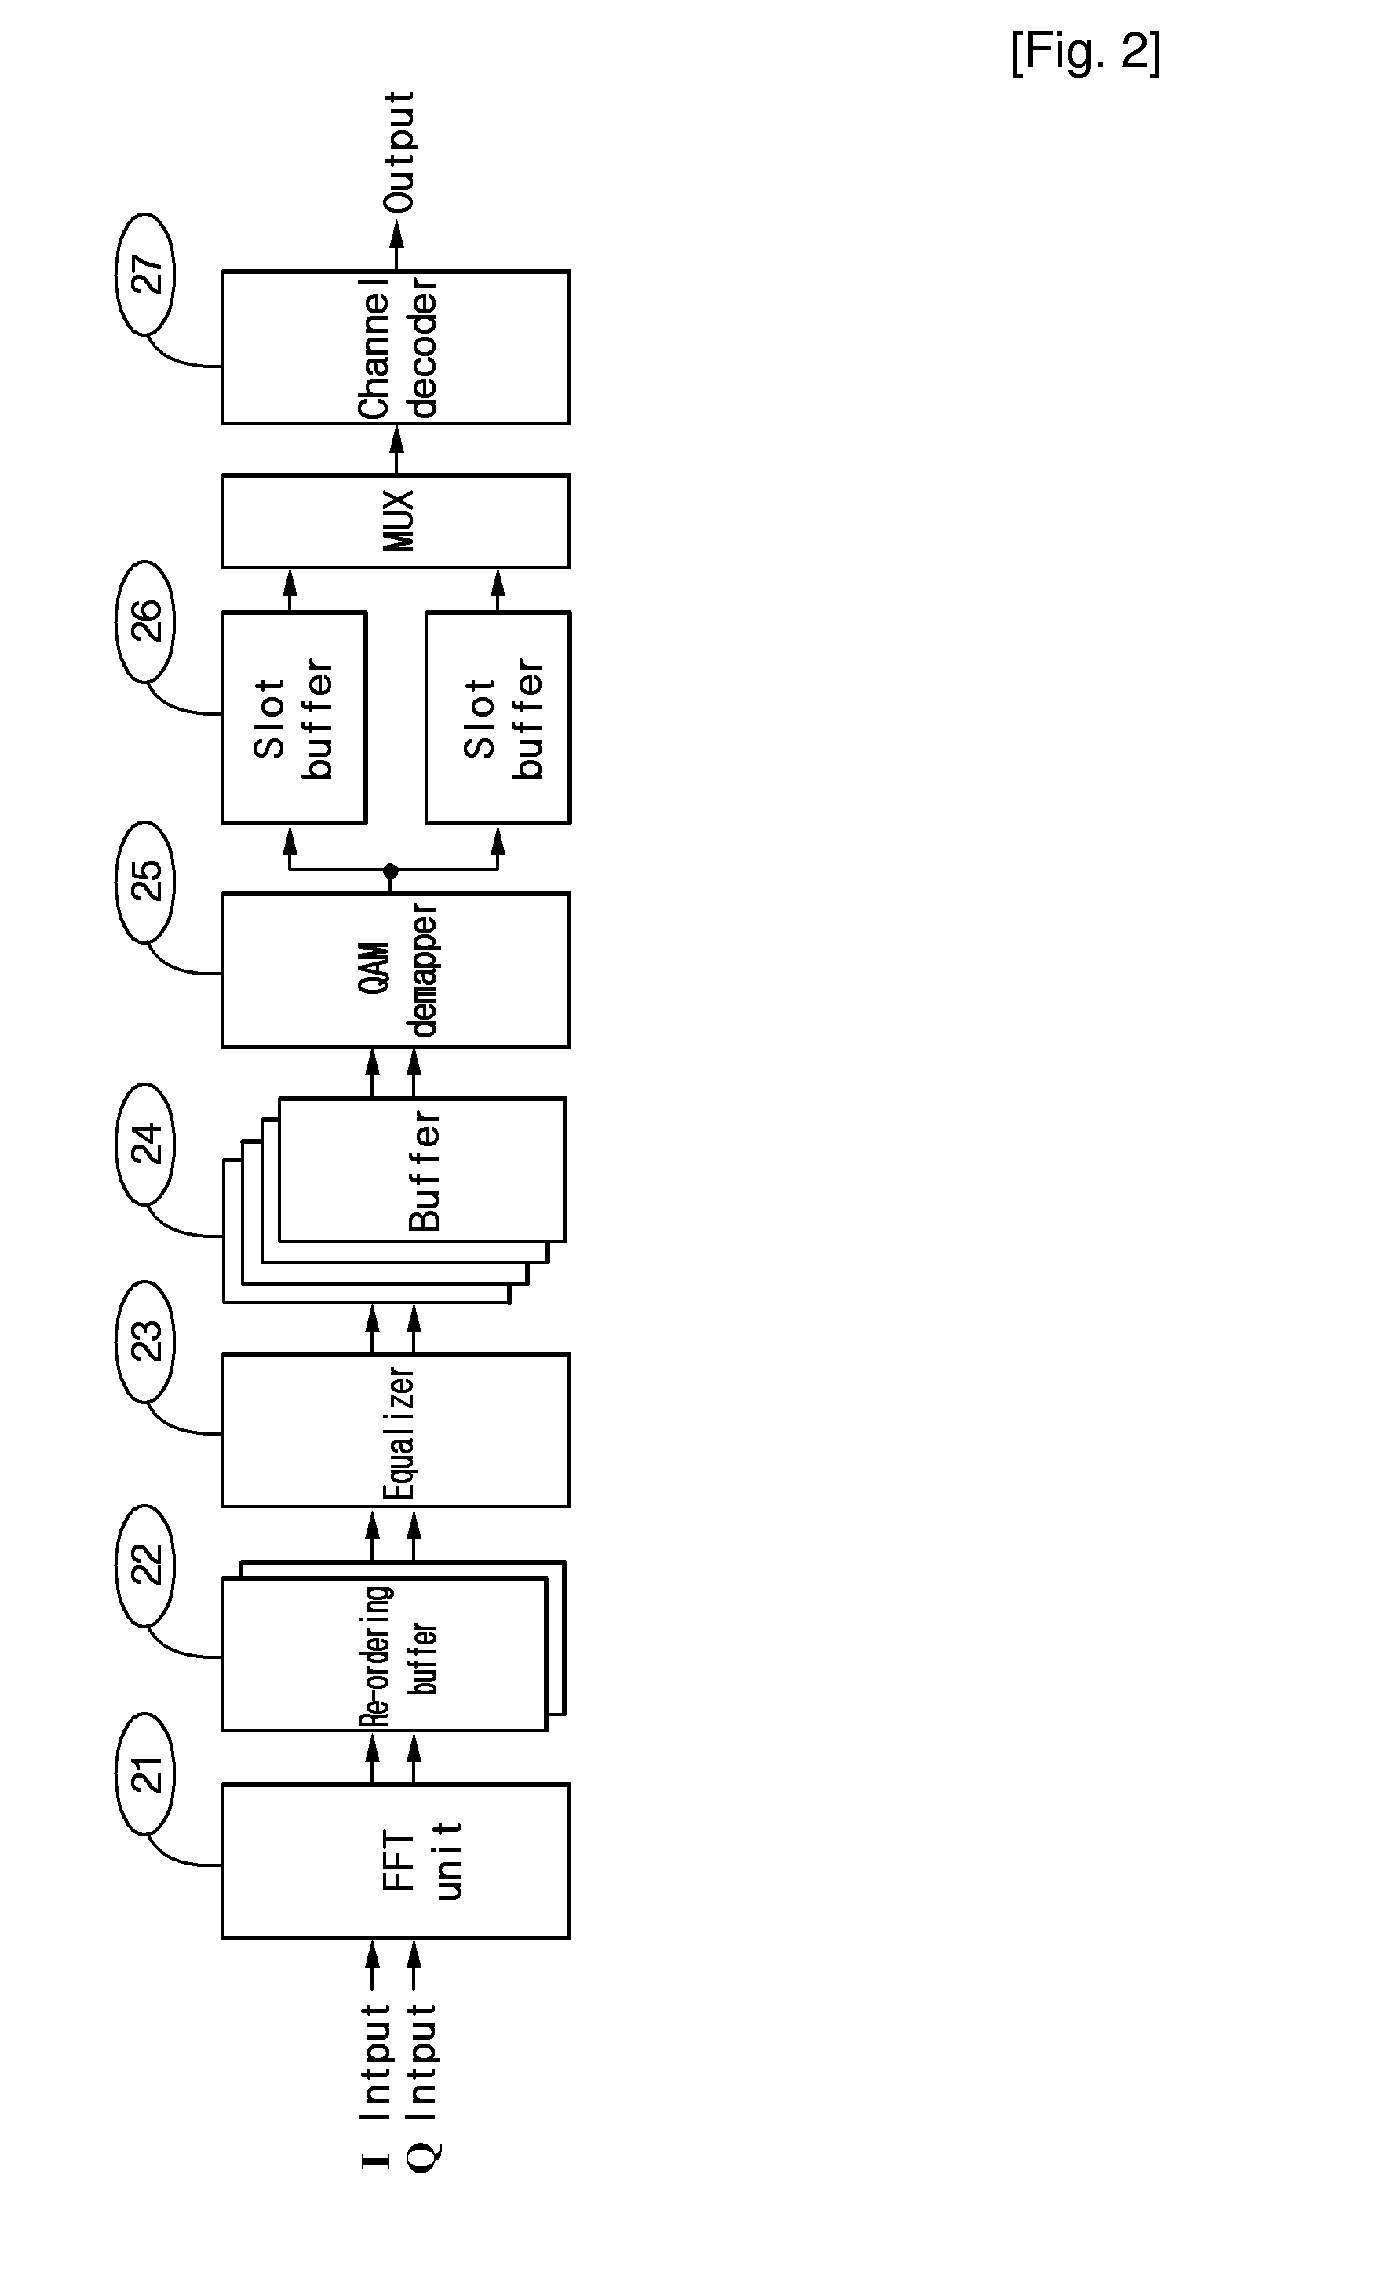 Demodulation Apparatus for Efficiently Embodying Adaptive Modulation and Coding Method in Ofdma Based Packet Communication System and Method Thereof